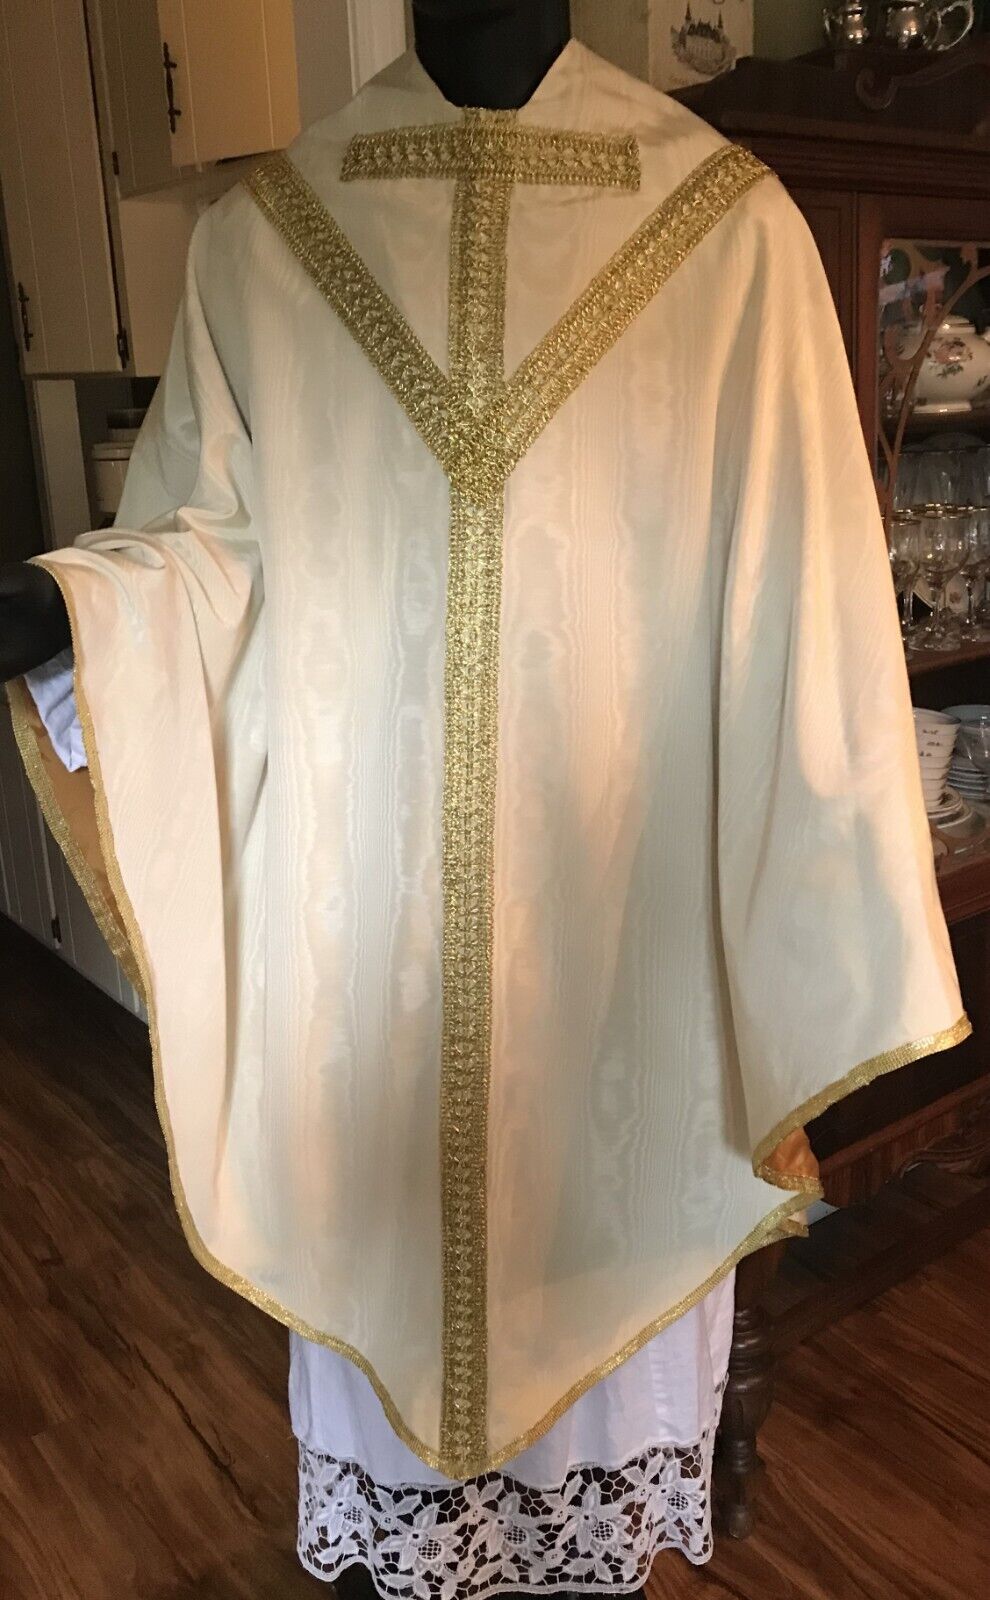 White Silk Conical Chasuble (5 piece vestment set) Homemade